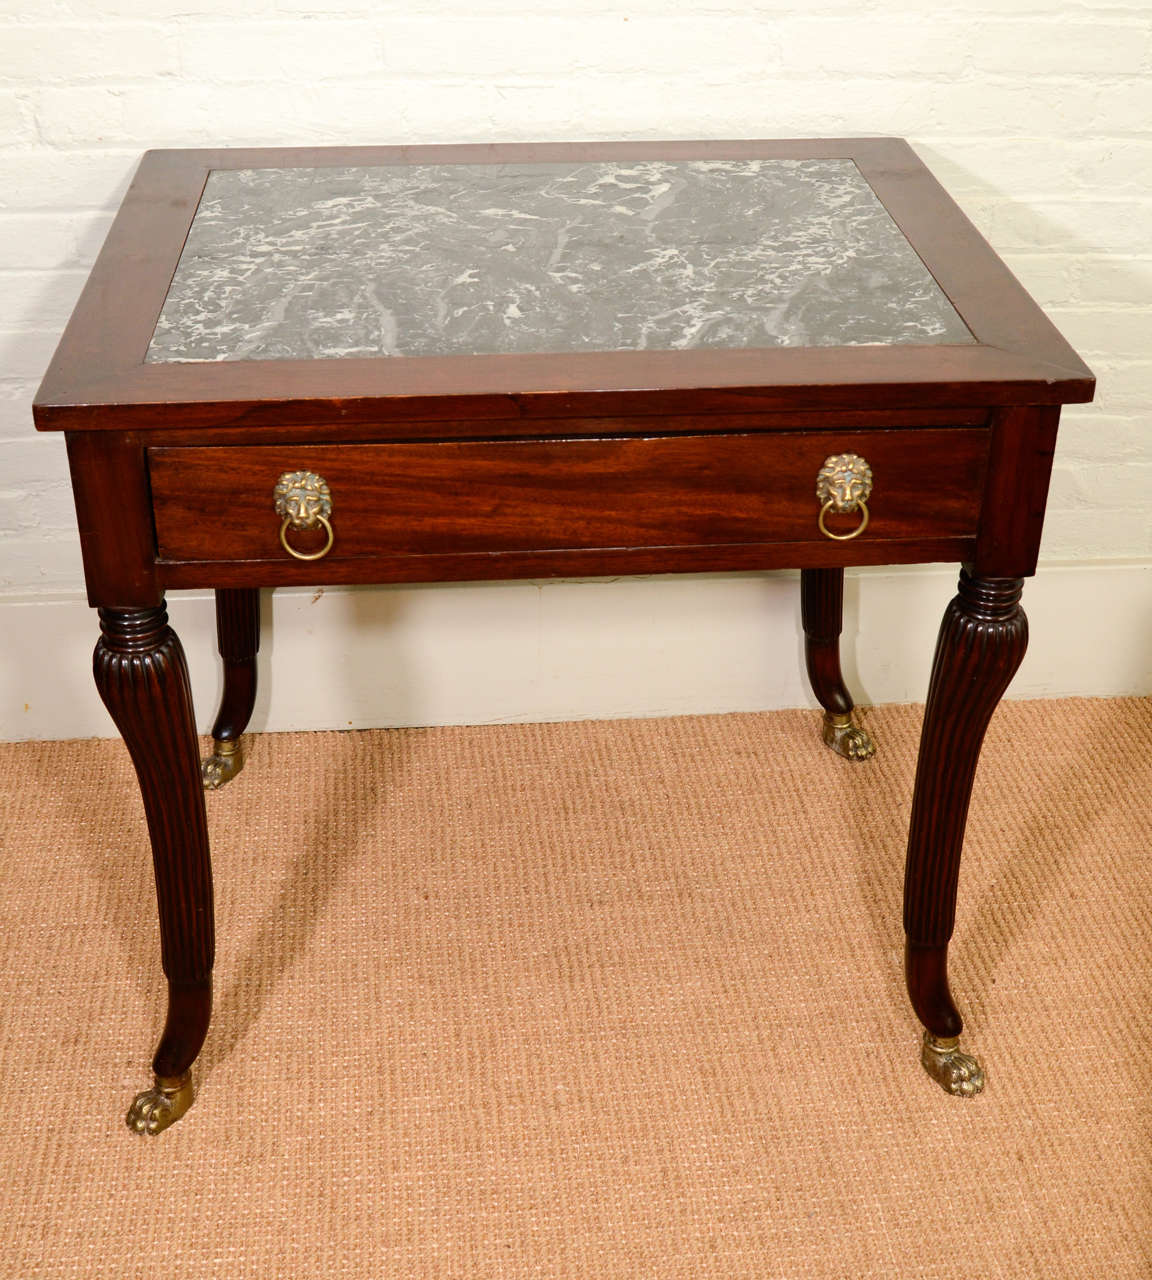 The top inlaid with a variegated grey marble top. The top over a frieze containing a single drawer with two lion's head gilt metal pulls. The table raised on four fluted and turned tapered sabre form legs ending in brass paw feet.